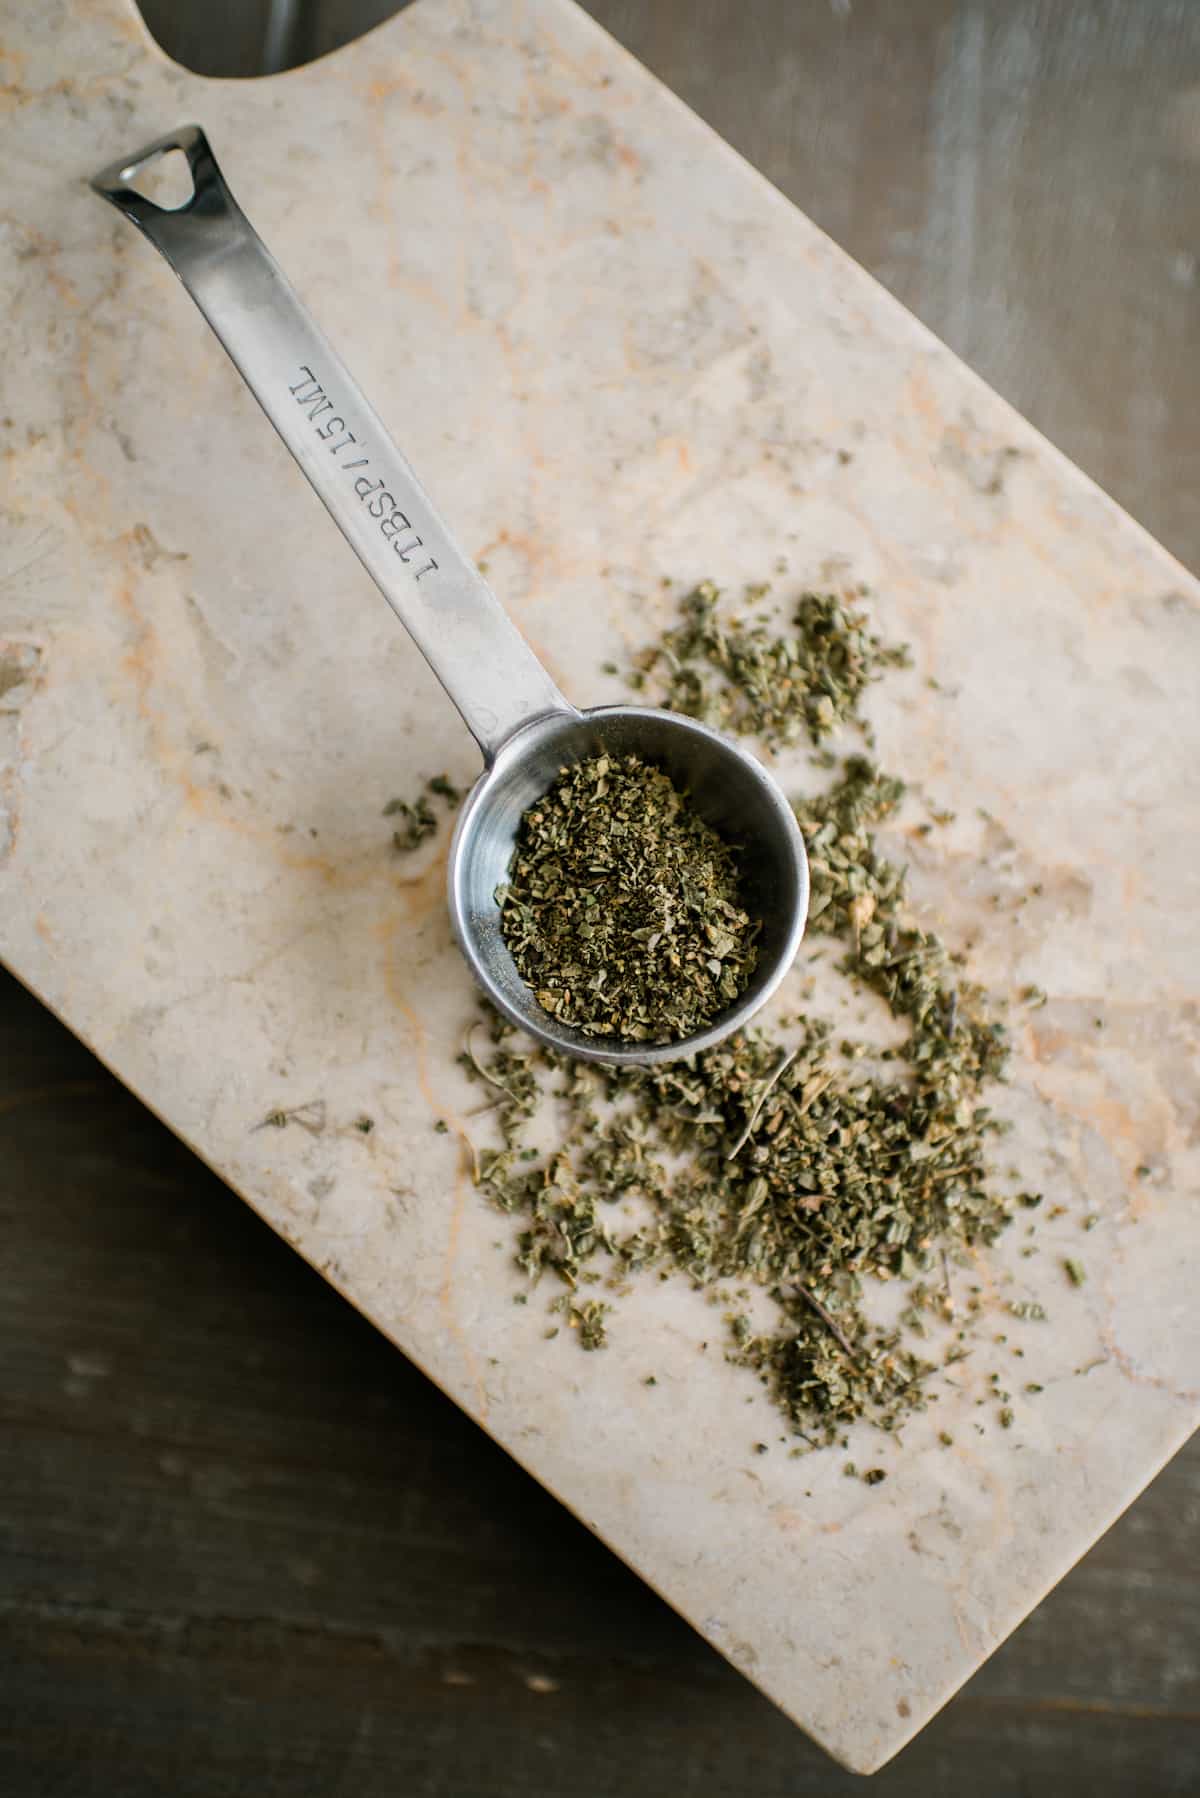 silver tablespoon measure with dried oregano on a marble surface.